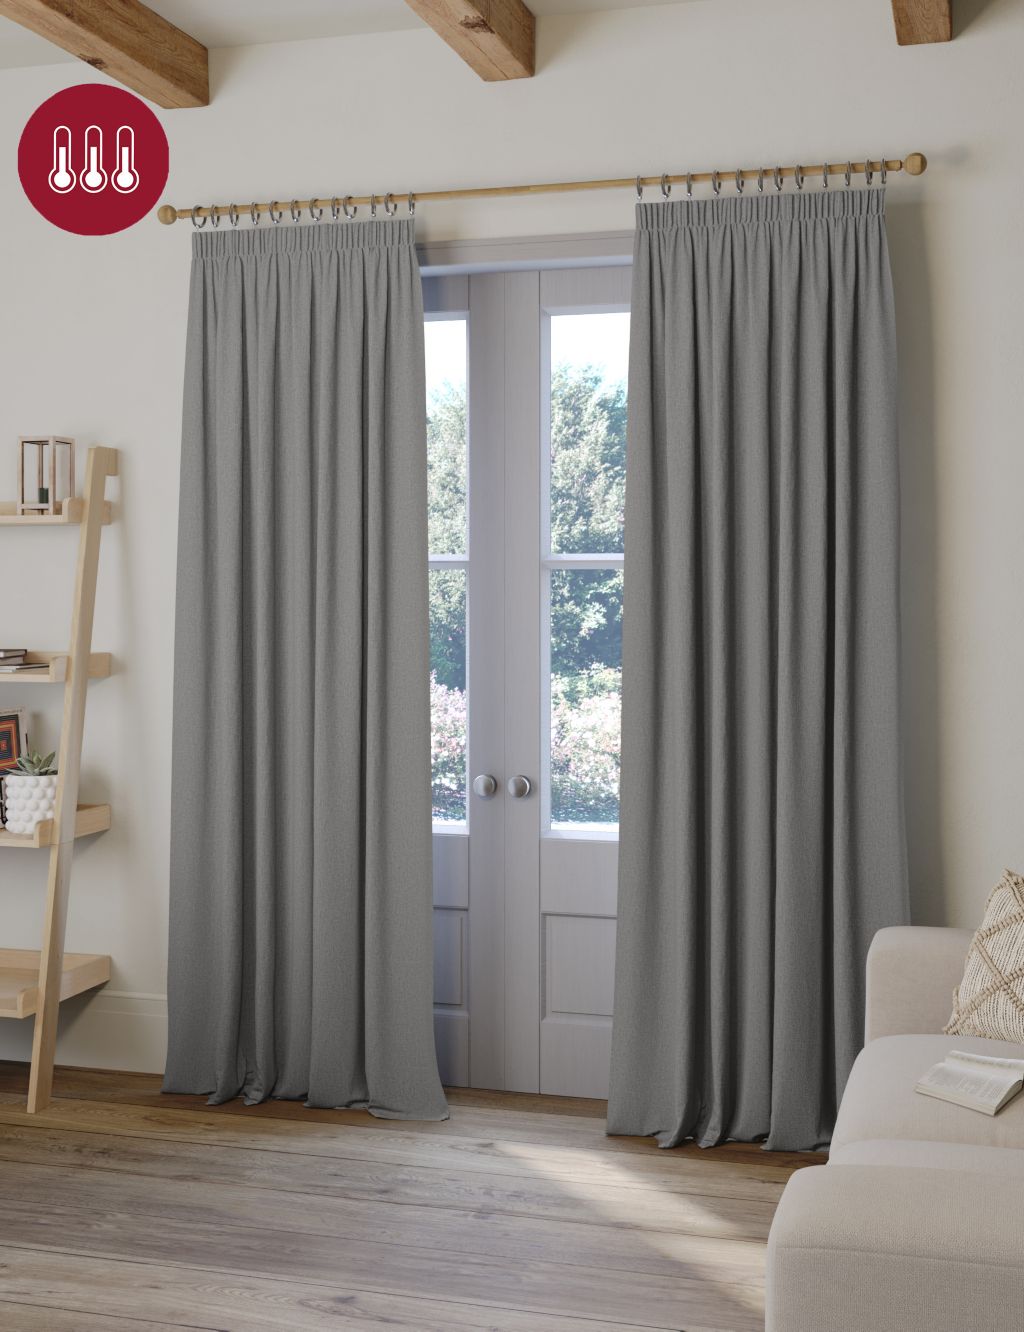 Brushed Pencil Pleat Blackout Thermal Curtains image 4